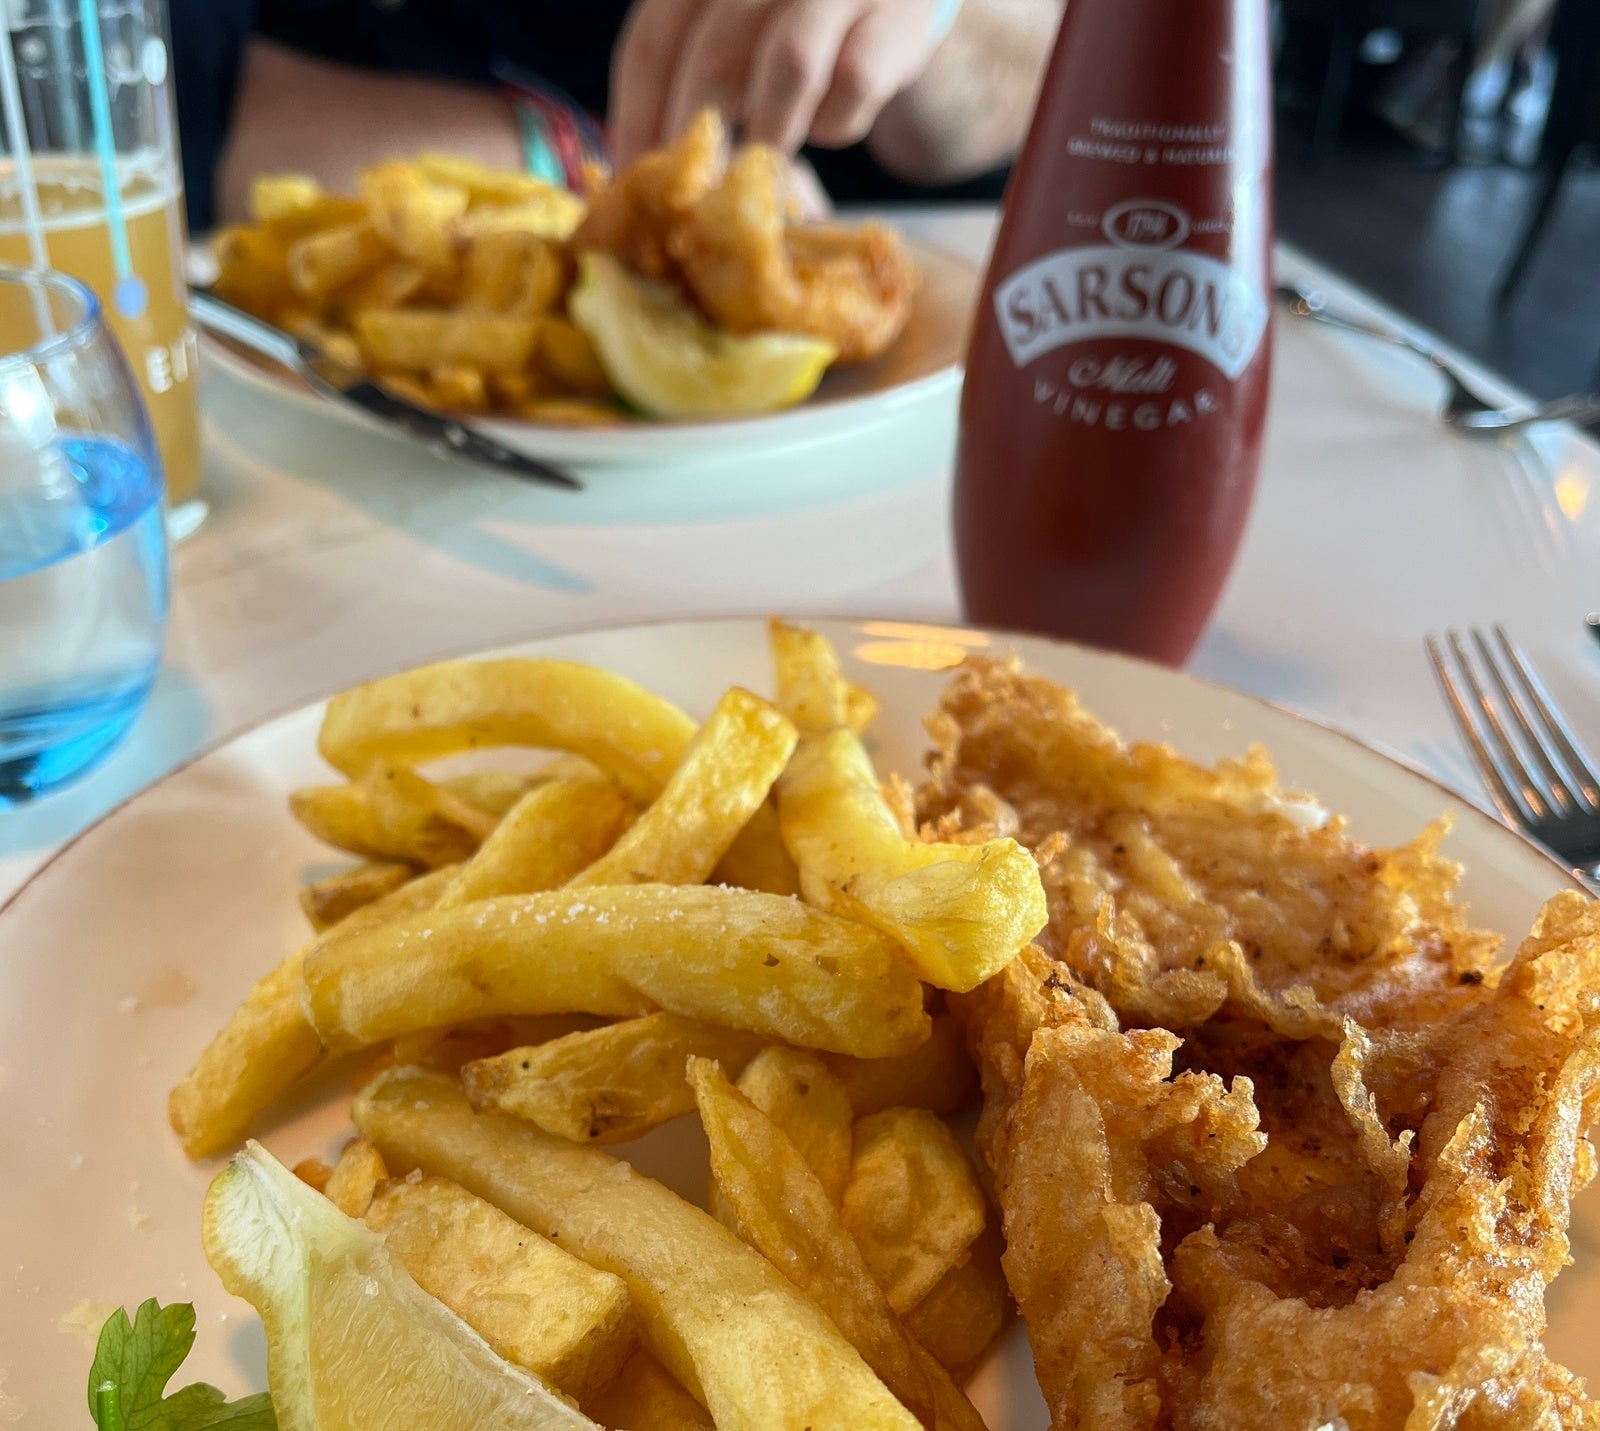 Fish and chips at Fishmarket, Newhaven